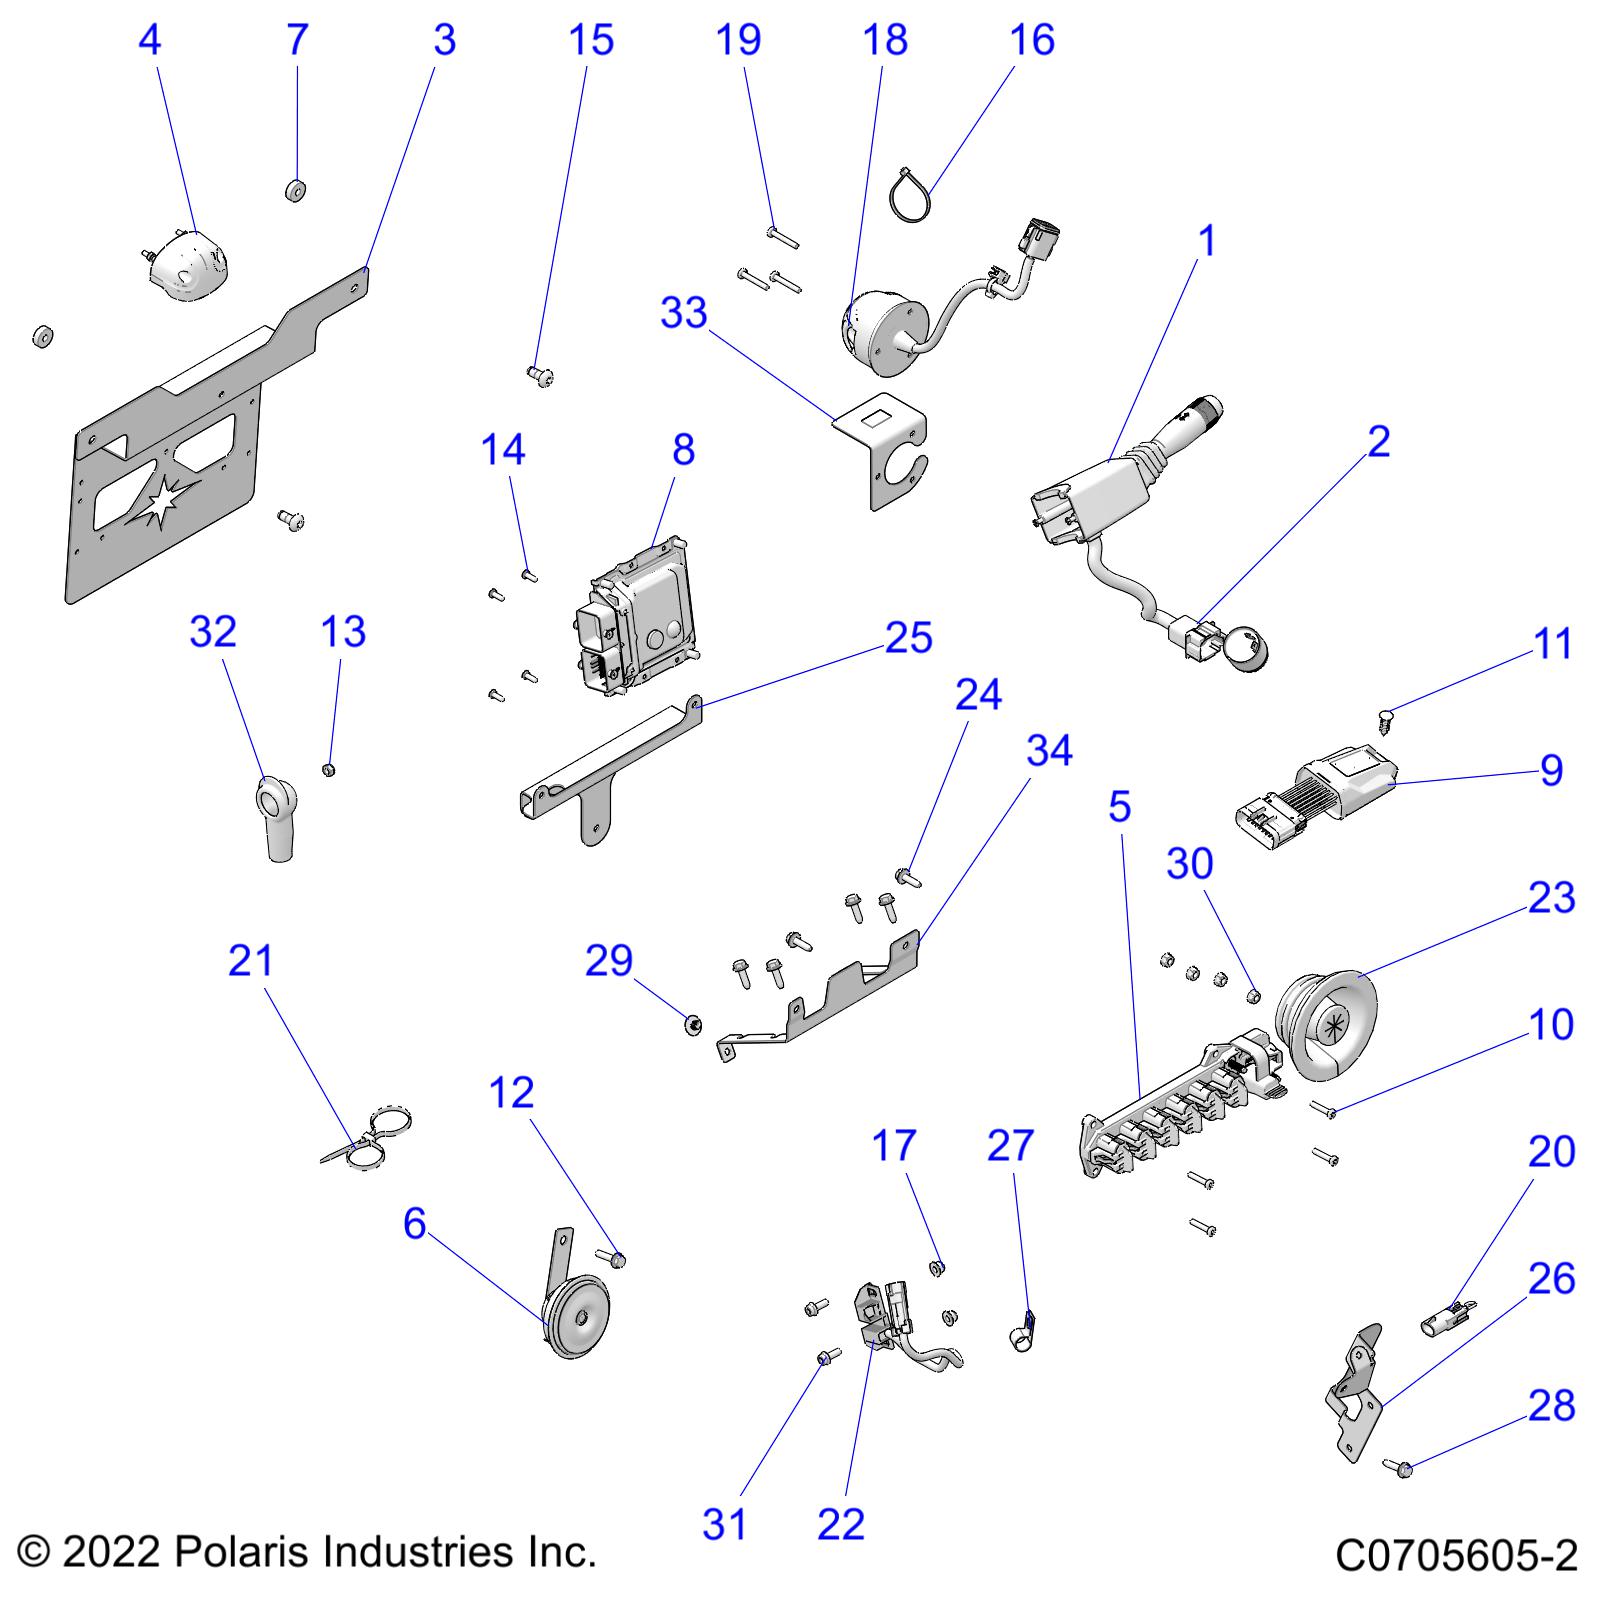 Part Number : 5270656 SHIELD-TRAILER CONNECTOR FS